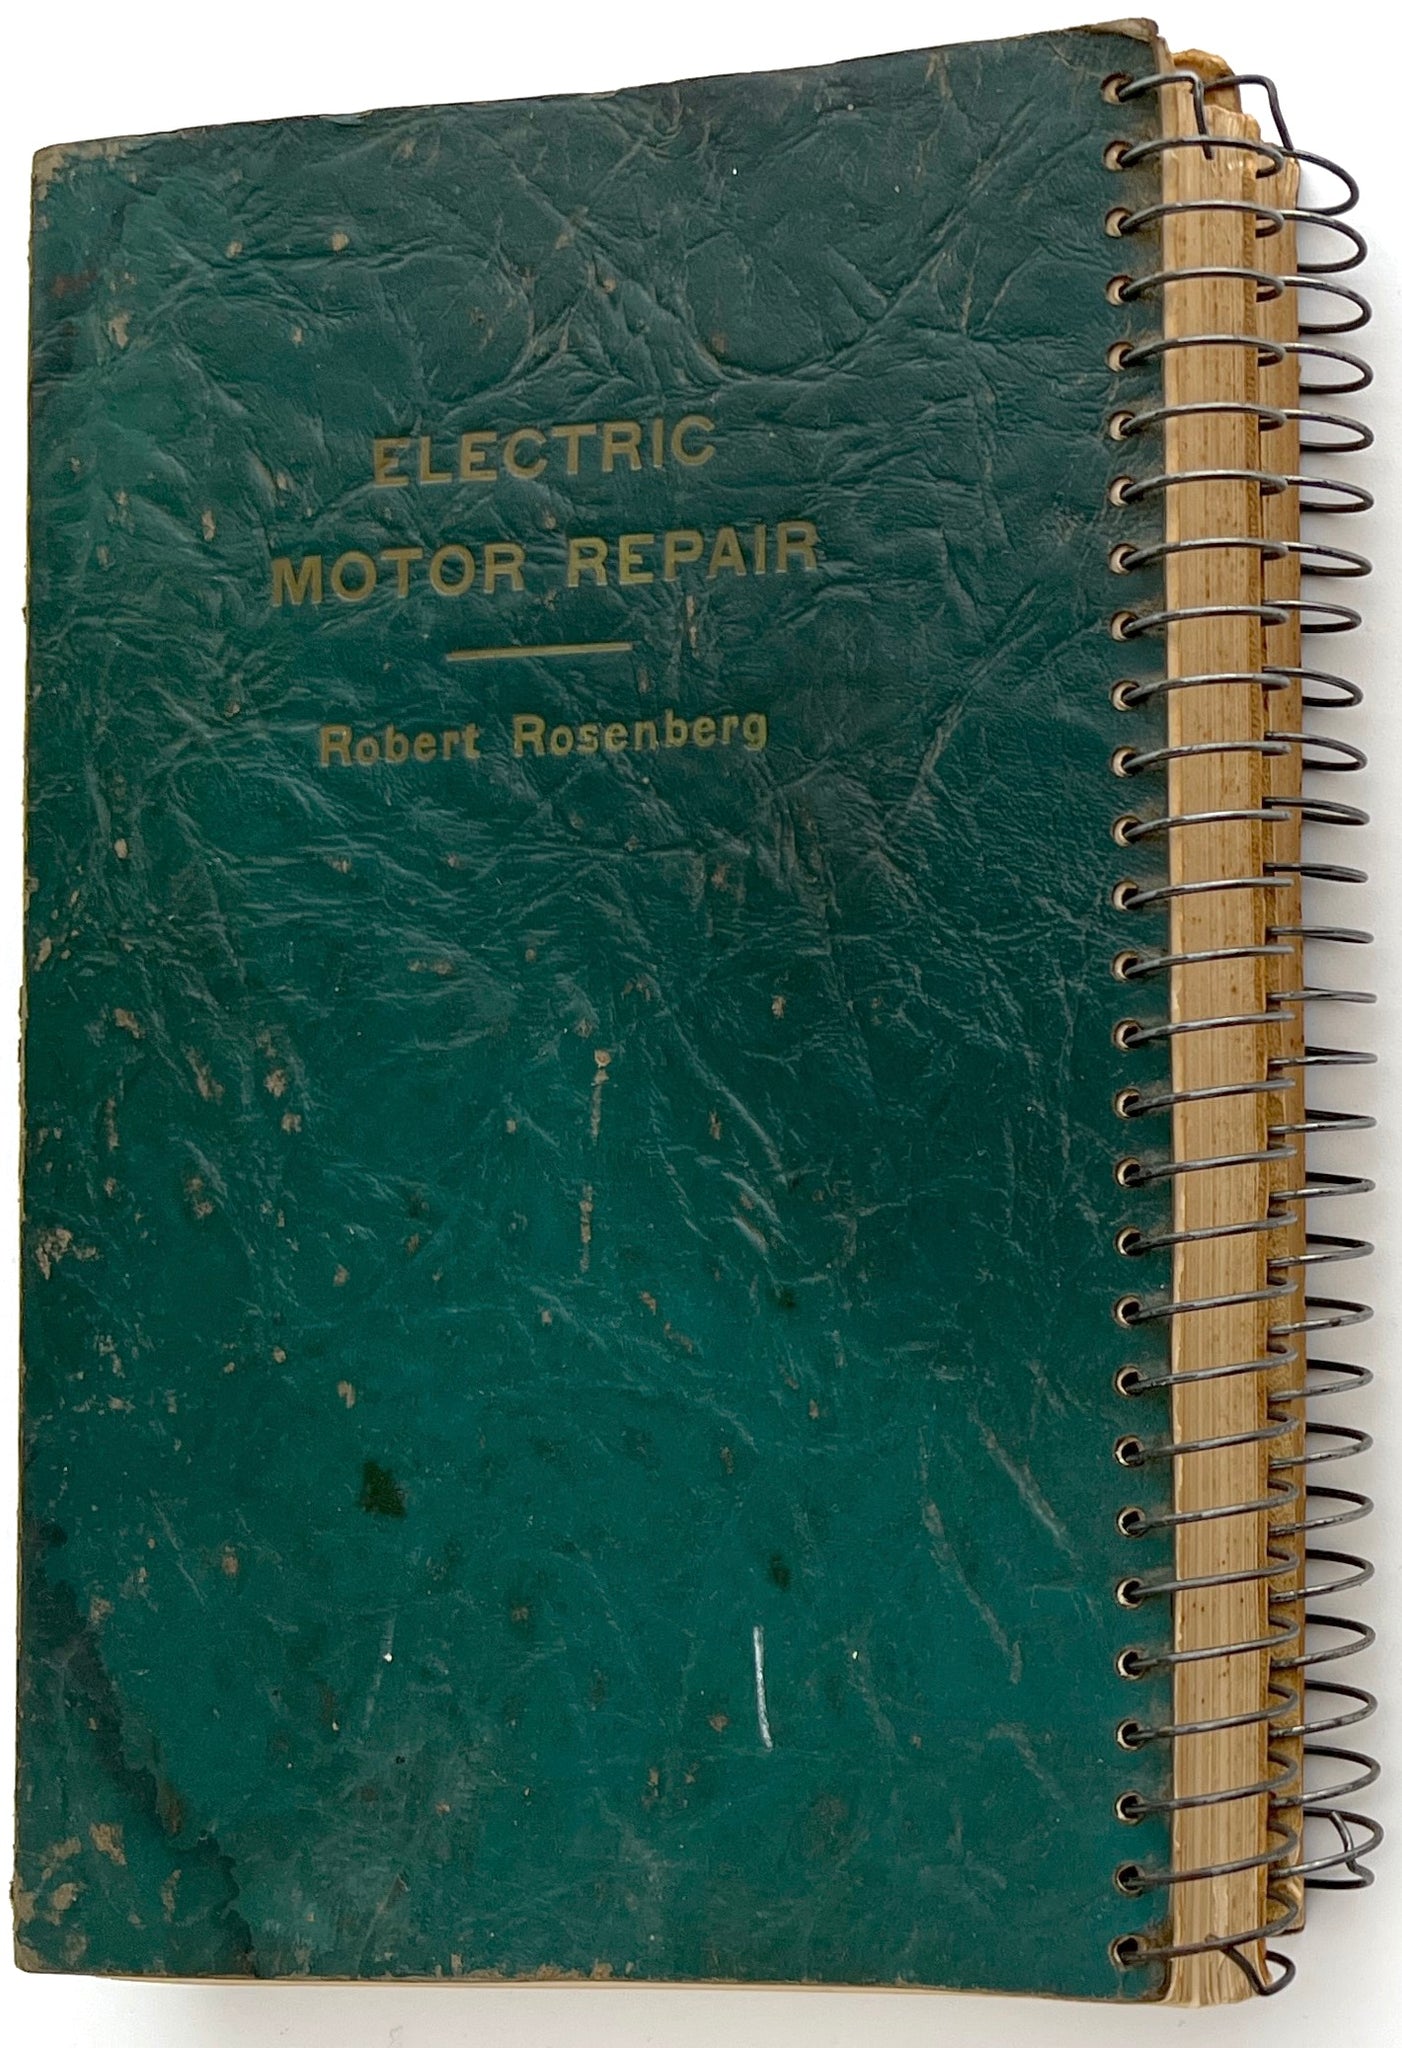 Electric Motor Repair: A Practical Book on the Winding, Repair, and Troubleshooting of A-C and D-C Motors and Controllers